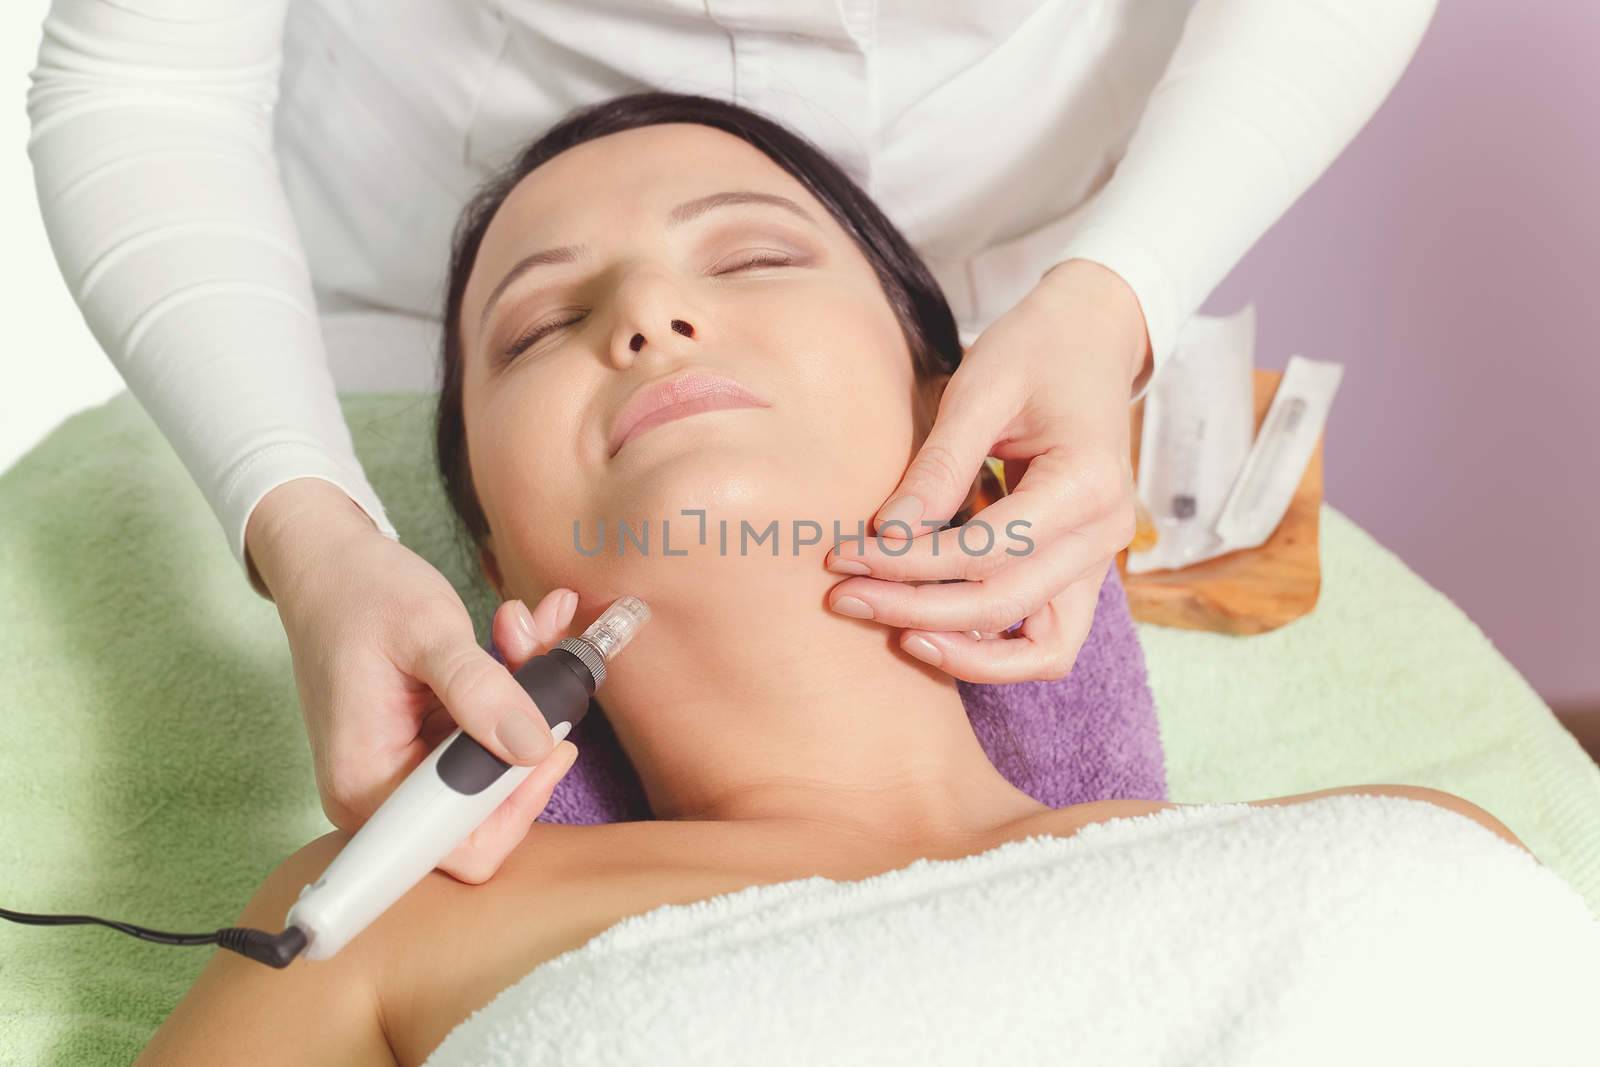 Mesotherapy treatment by Slast20